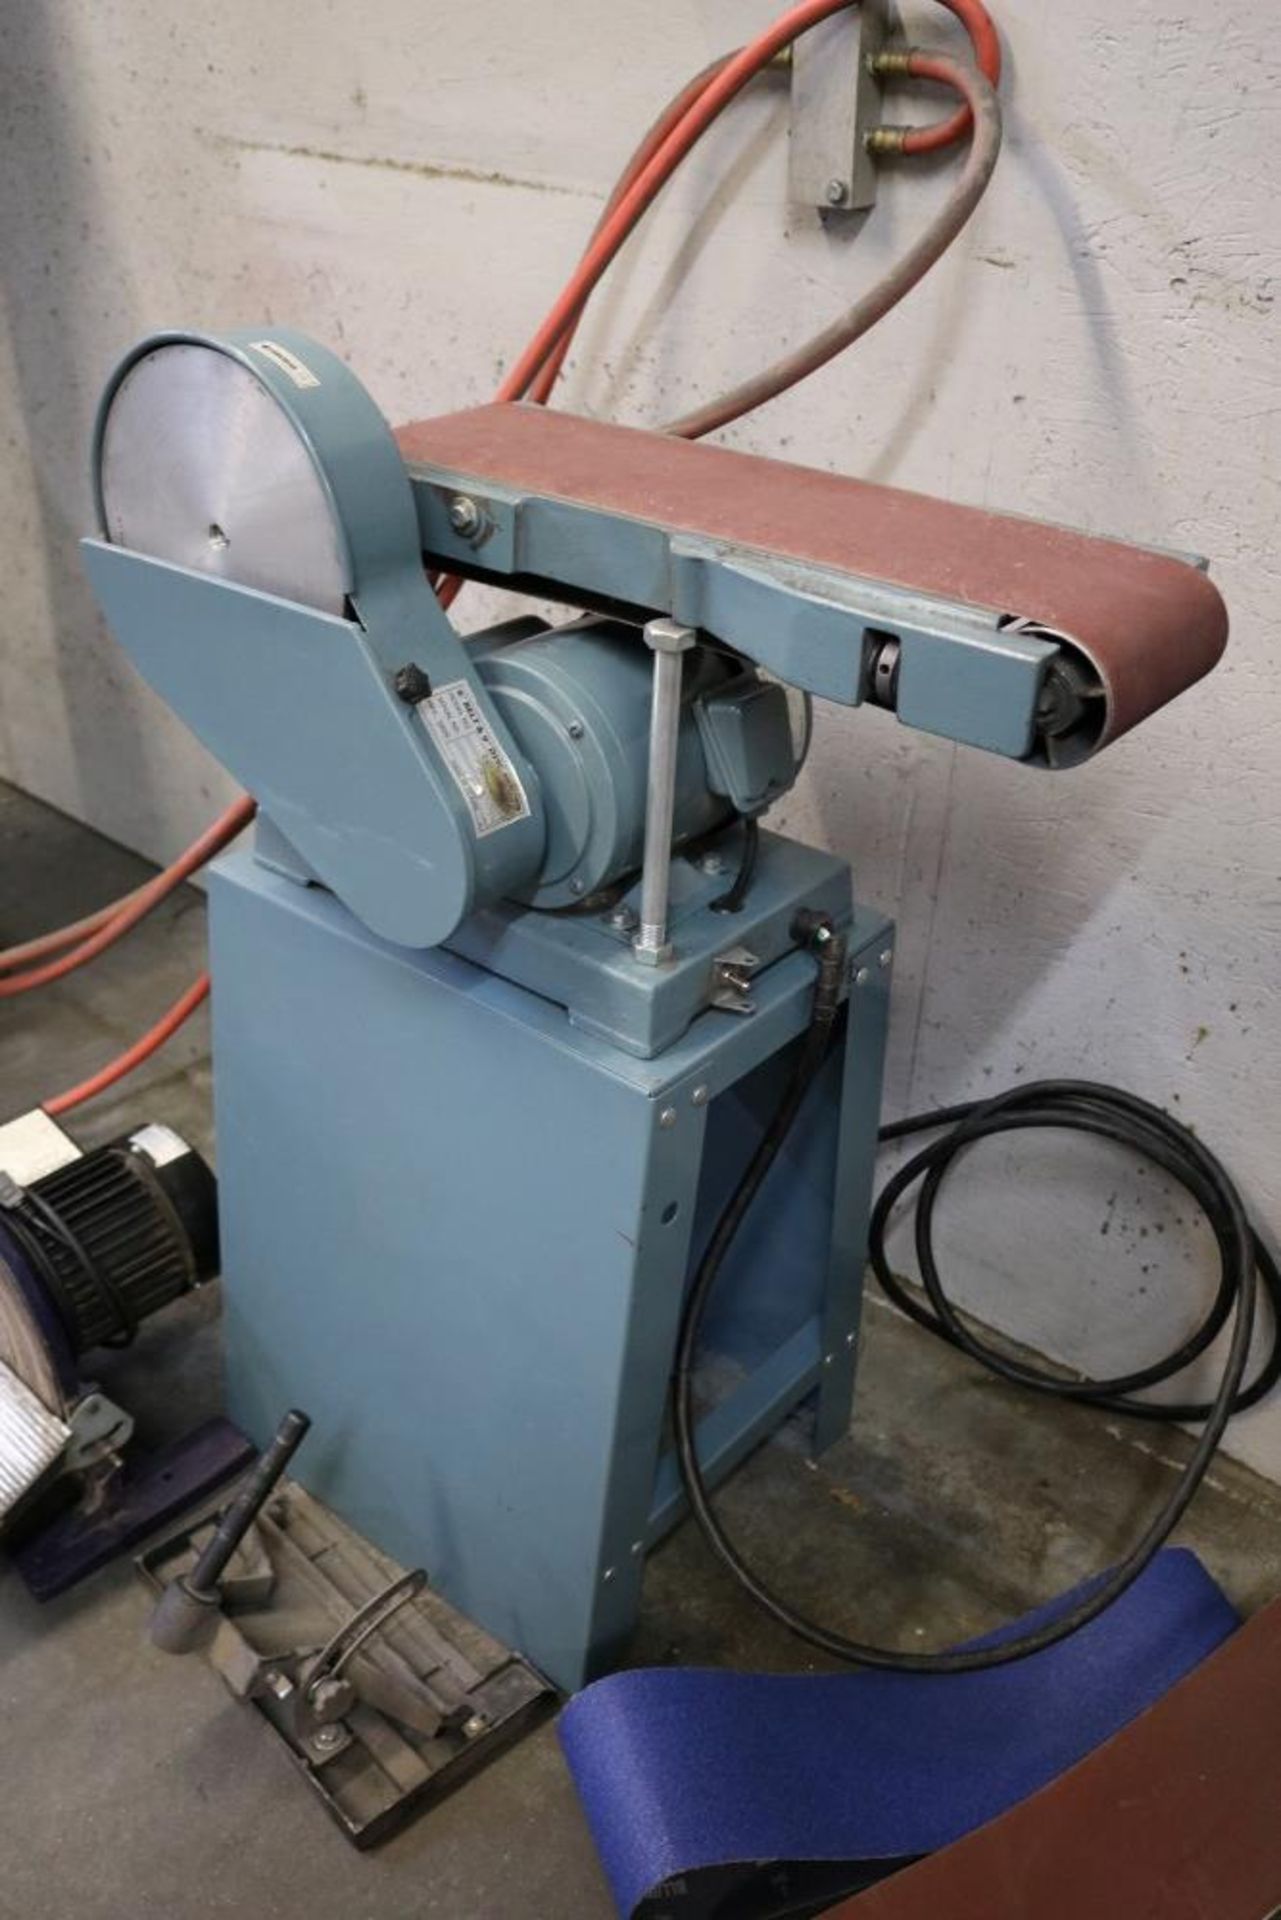 Central Machinery 10" Disc Sander, 3/4 HP, 1750 RPM and Also 6" Belt / 9" Disc Sander Combo - Image 5 of 7